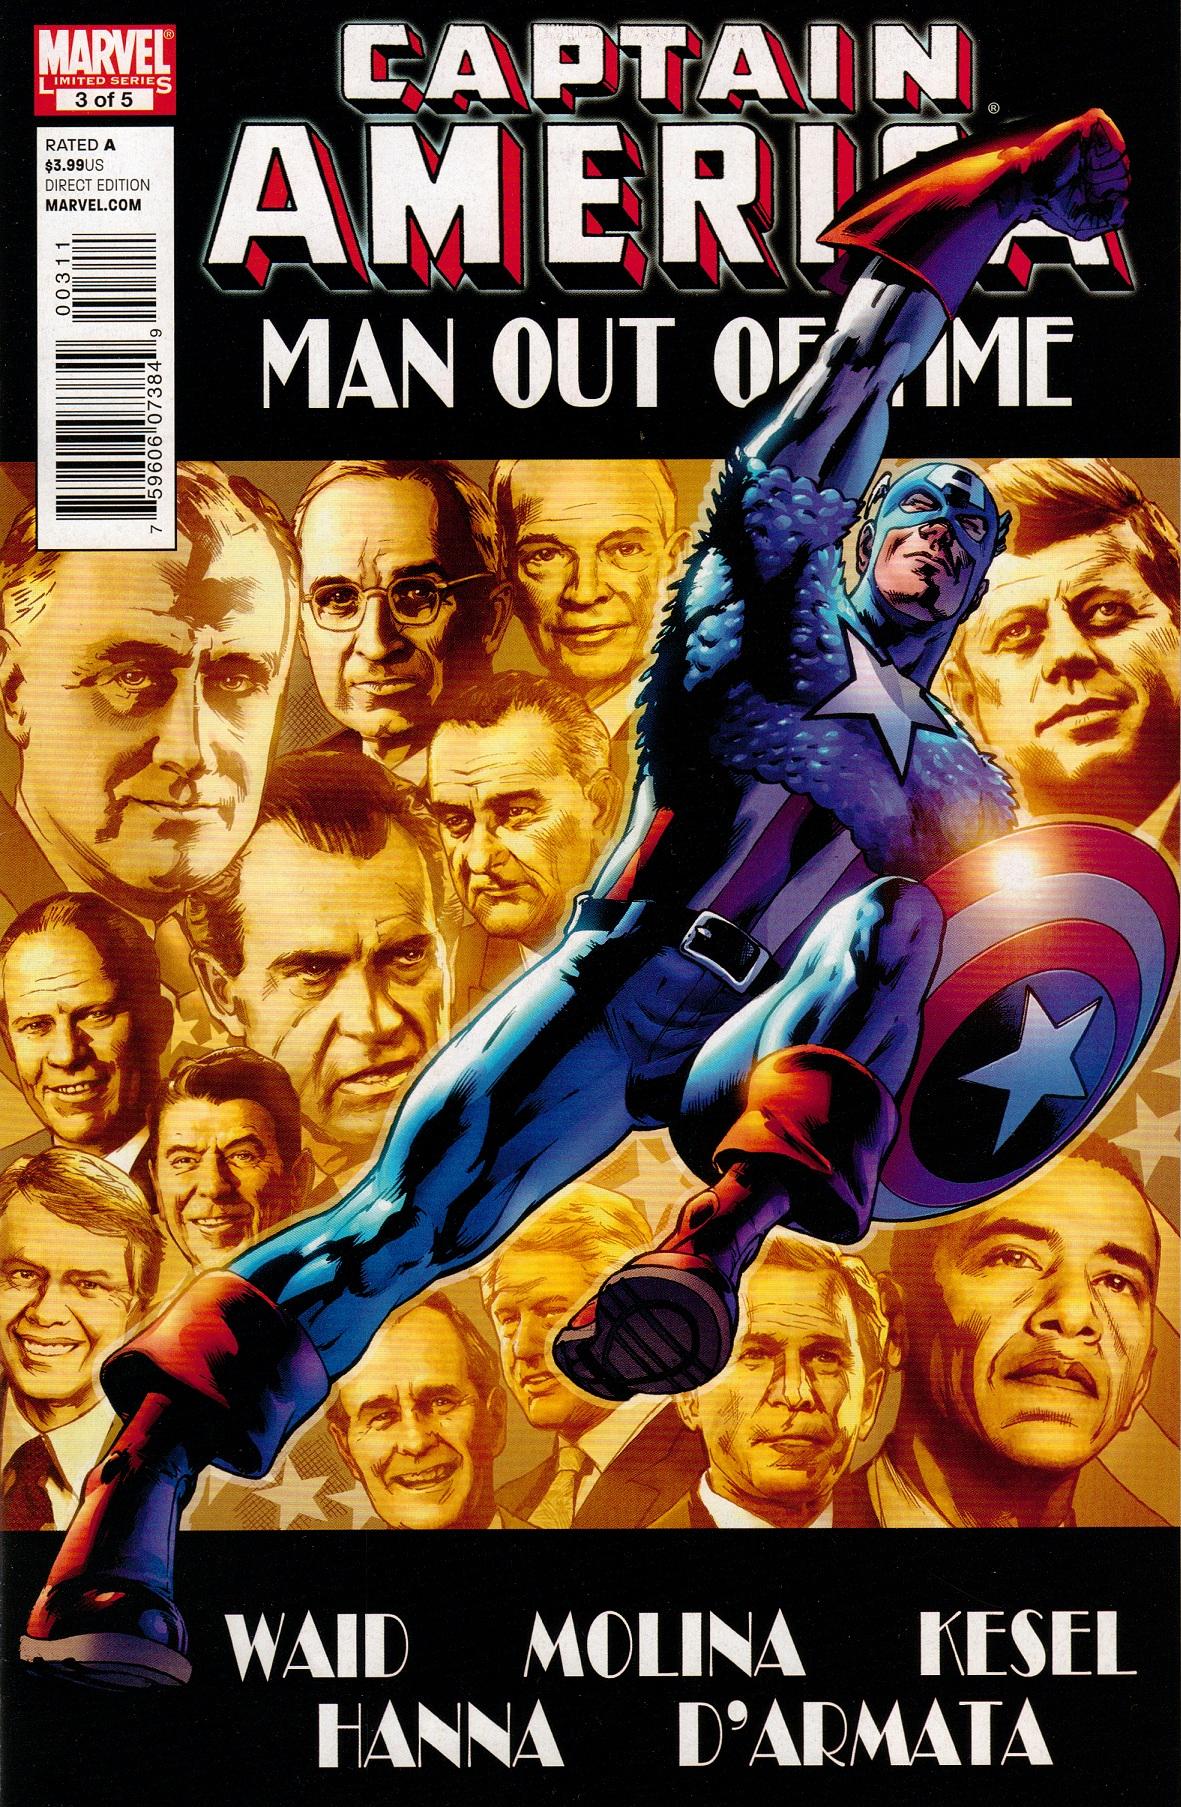 Captain America: Man Out of Time Vol. 1 #3